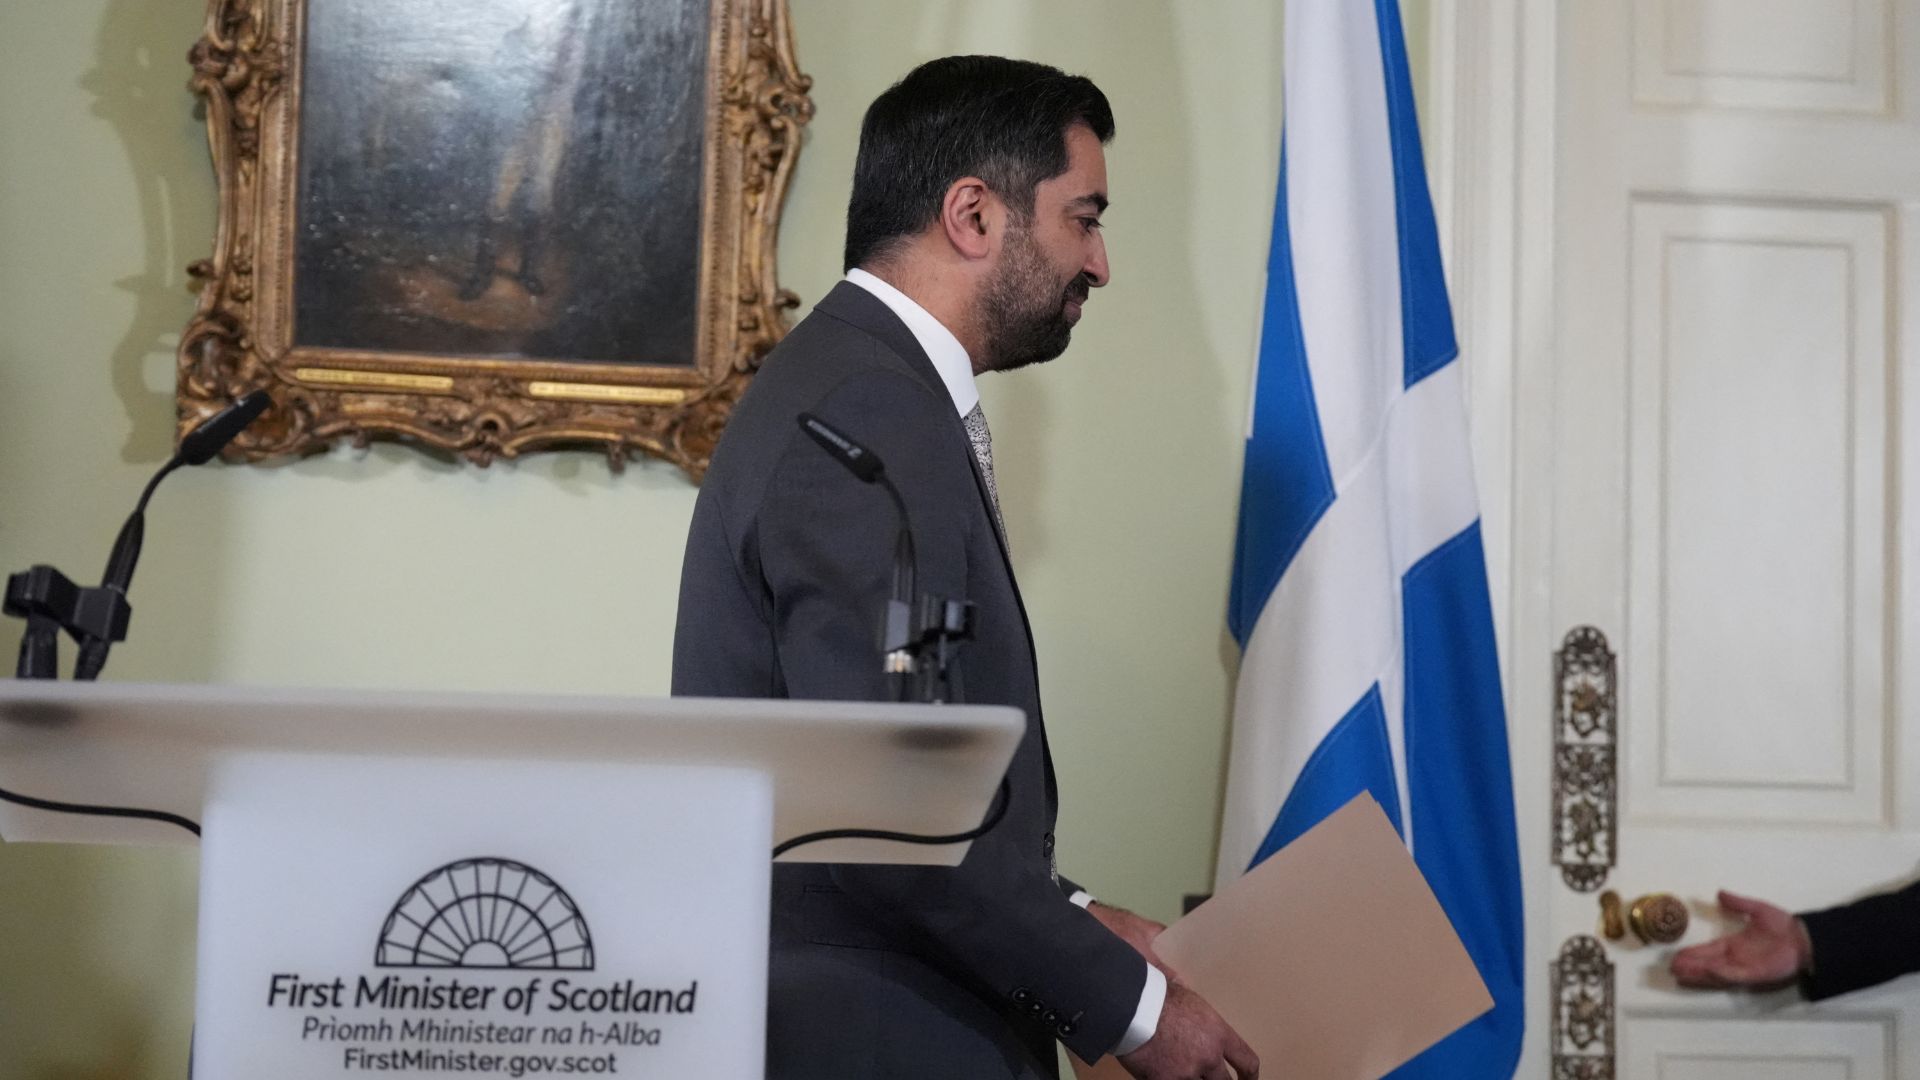 Scotland's First Minister Humza Yousaf leaves after his resignation news conference. /Andrew Milligan/Pool via Reuters